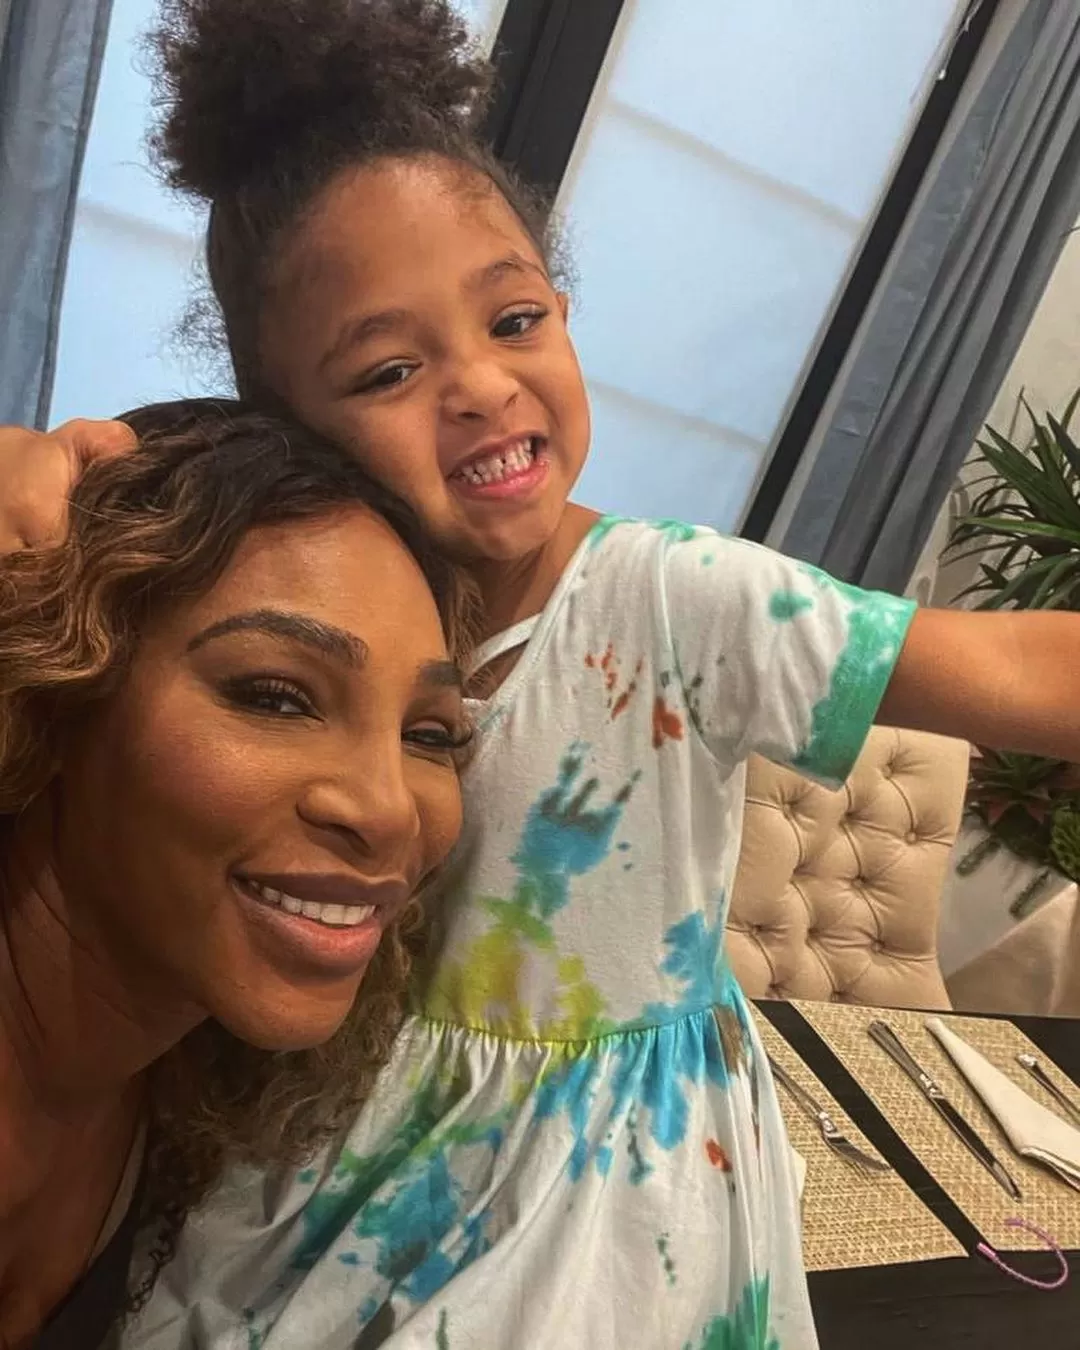 Serena Williams Shares A Happy Moment With Her Daughter Alexis Olympia ...